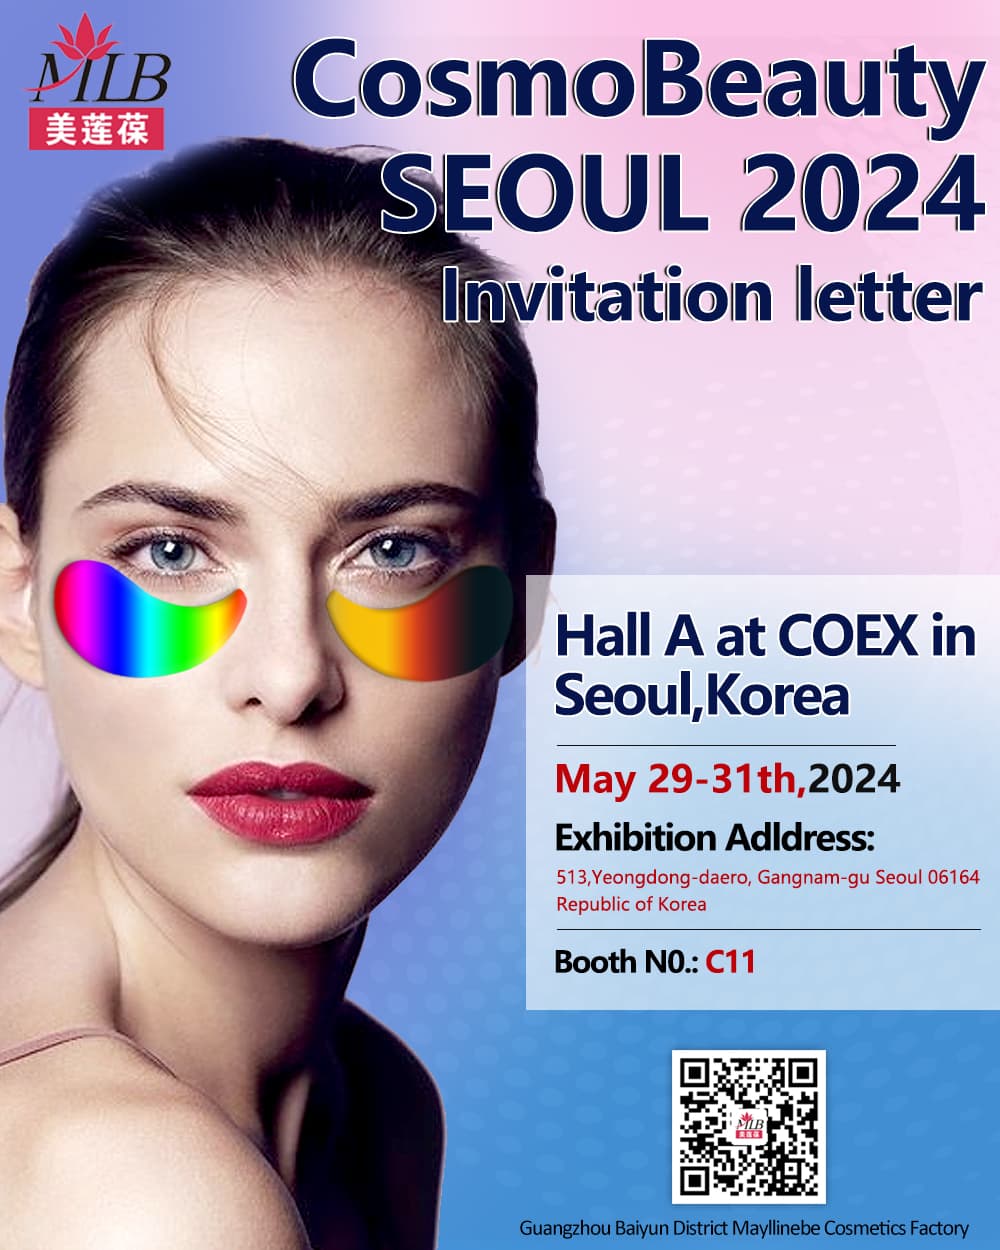 Mayllinebe nimmt an der Cosmo Beauty SEOUL 2024 teil